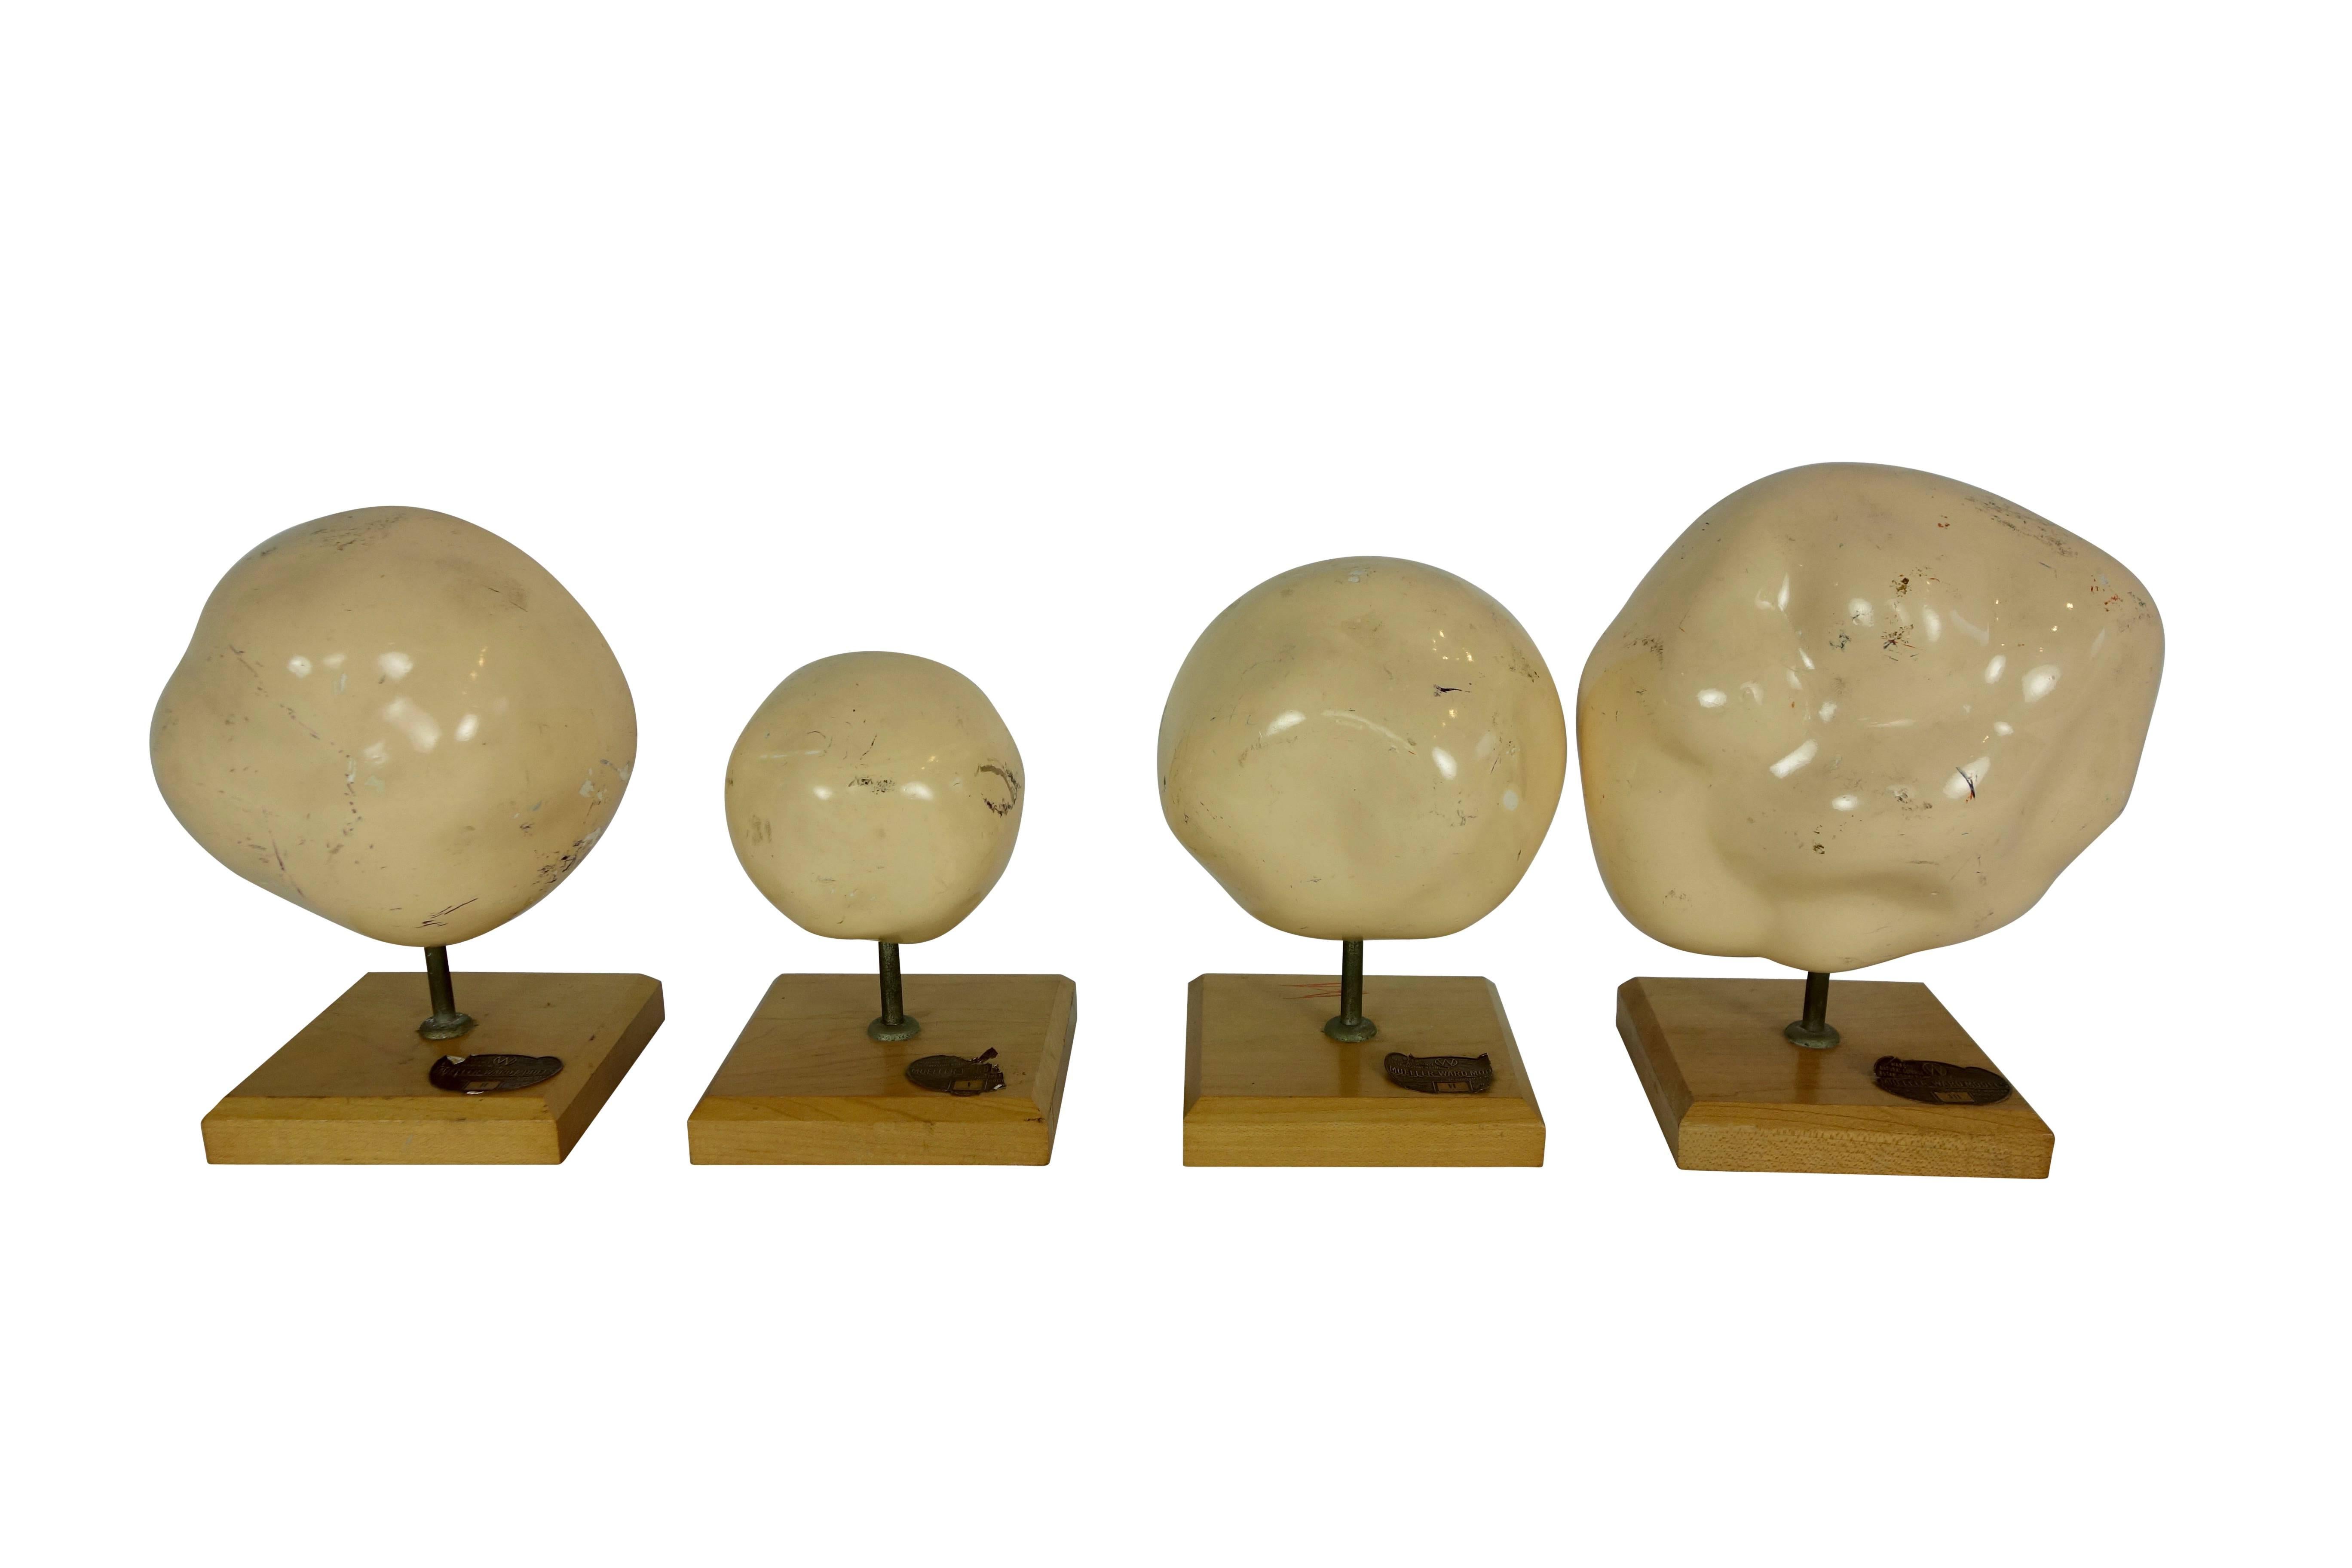 Mid-20th Century Set of Four Mueller-Ward 3d Cellular Mitosis Biology Models Copyright, 1941